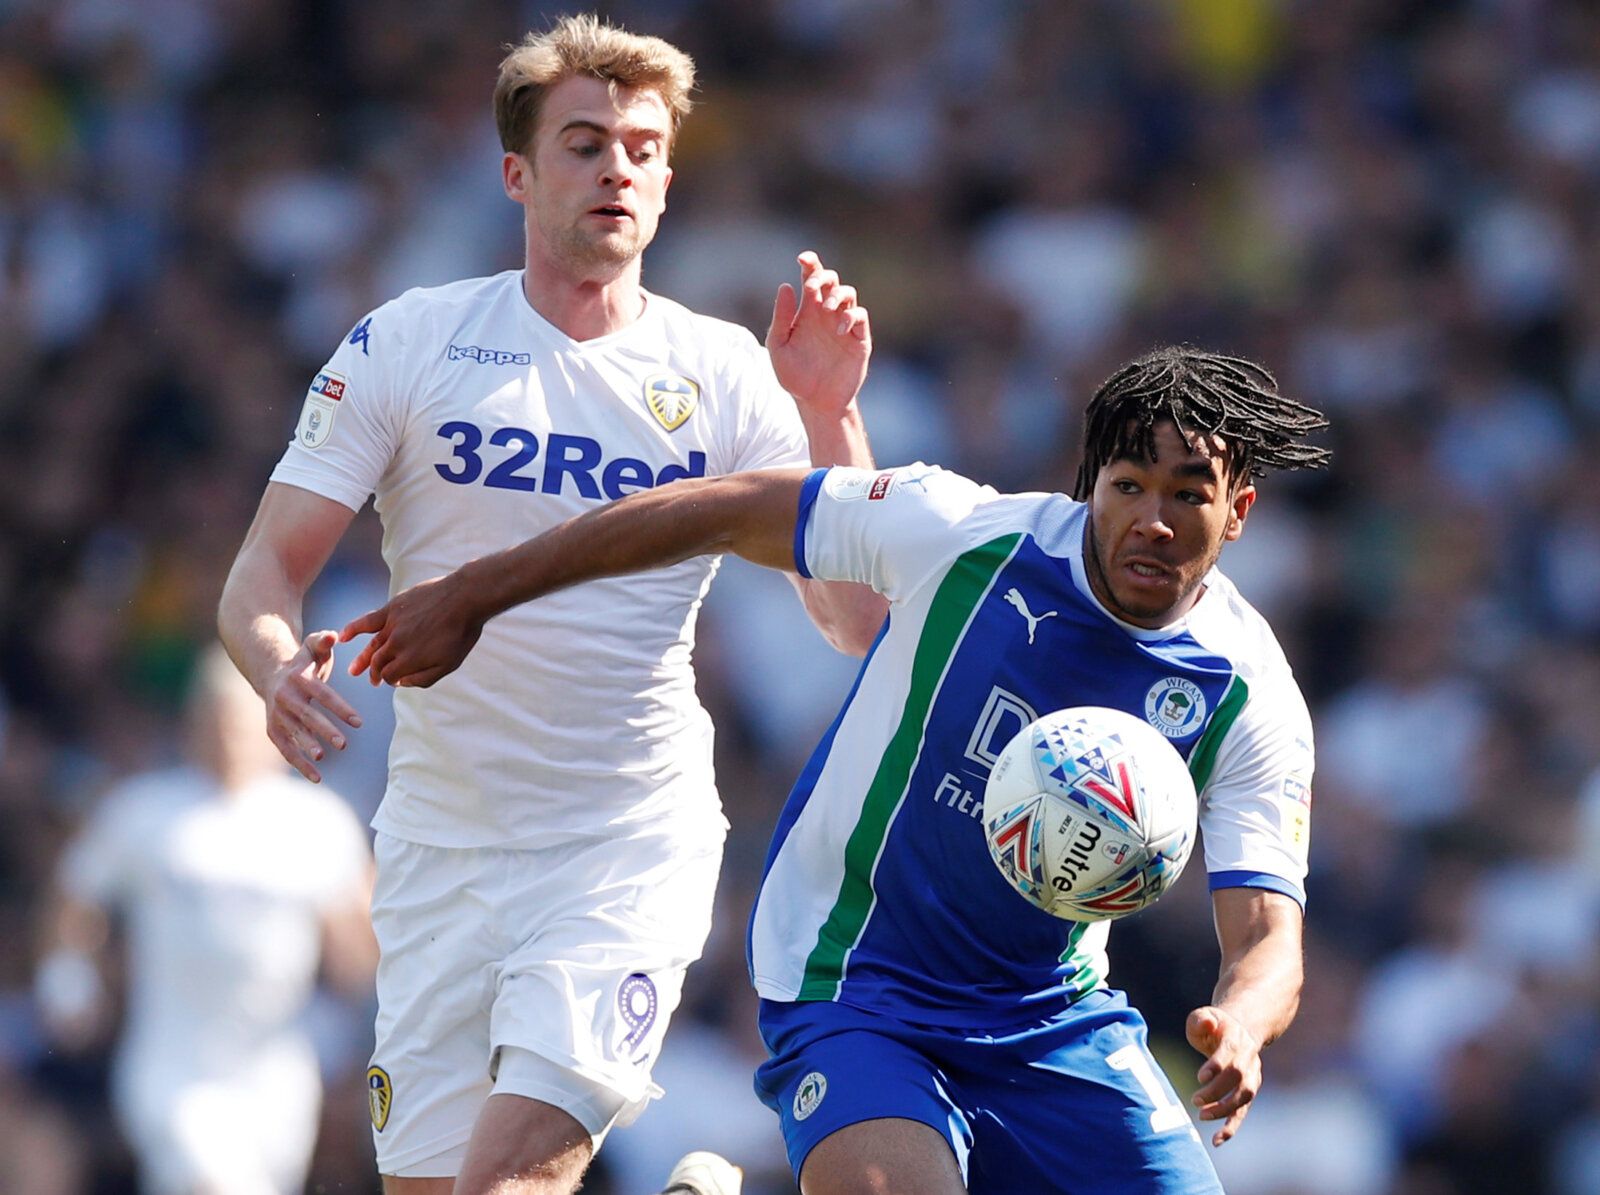 Soccer Football - Championship - Leeds United v Wigan Athletic - Elland Road, Leeds, Britain - April 19, 2019   Leeds' Patrick Bamford in action with Wigan's Reece James    Action Images/Andrew Boyers    EDITORIAL USE ONLY. No use with unauthorized audio, video, data, fixture lists, club/league logos or 